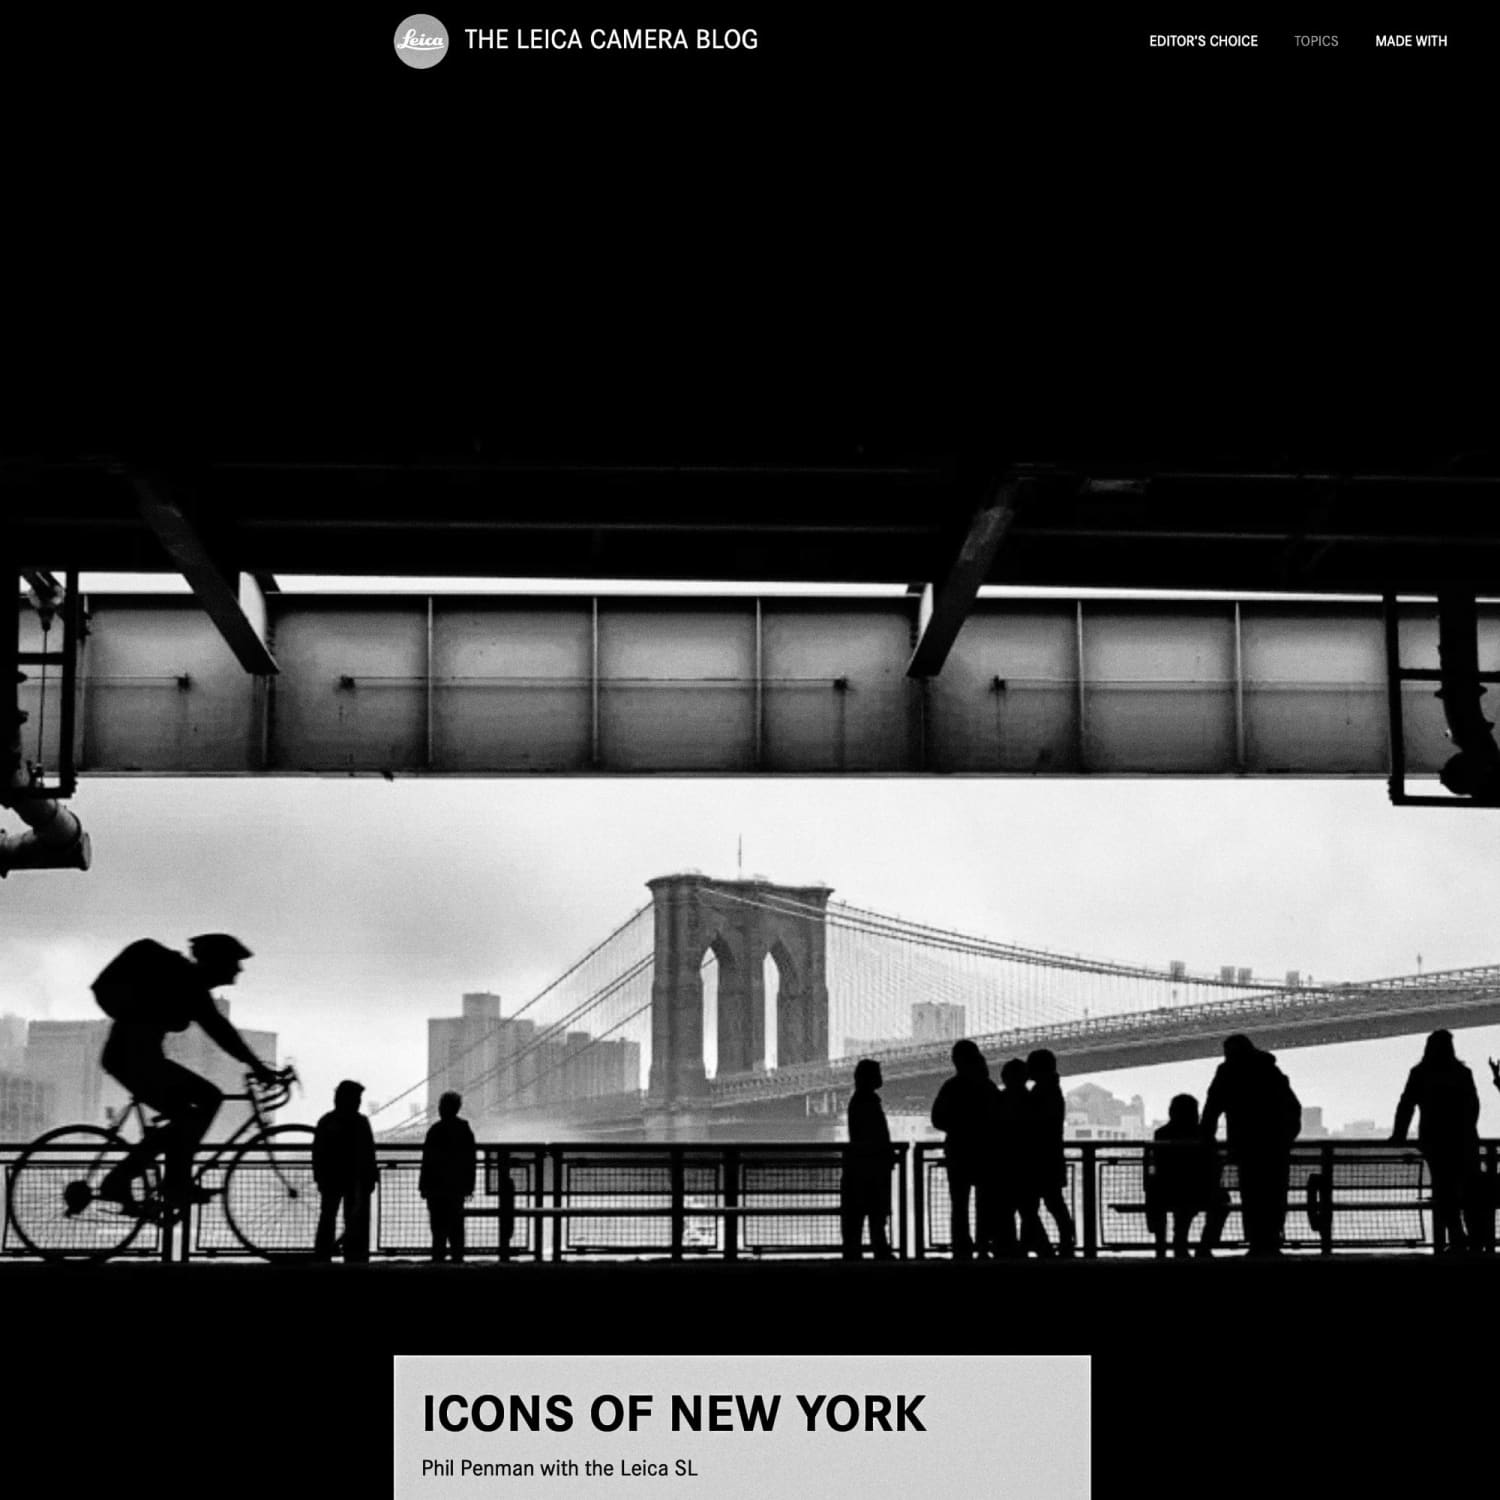 THE LEICA BLOG: ICONS OF NEW YORK